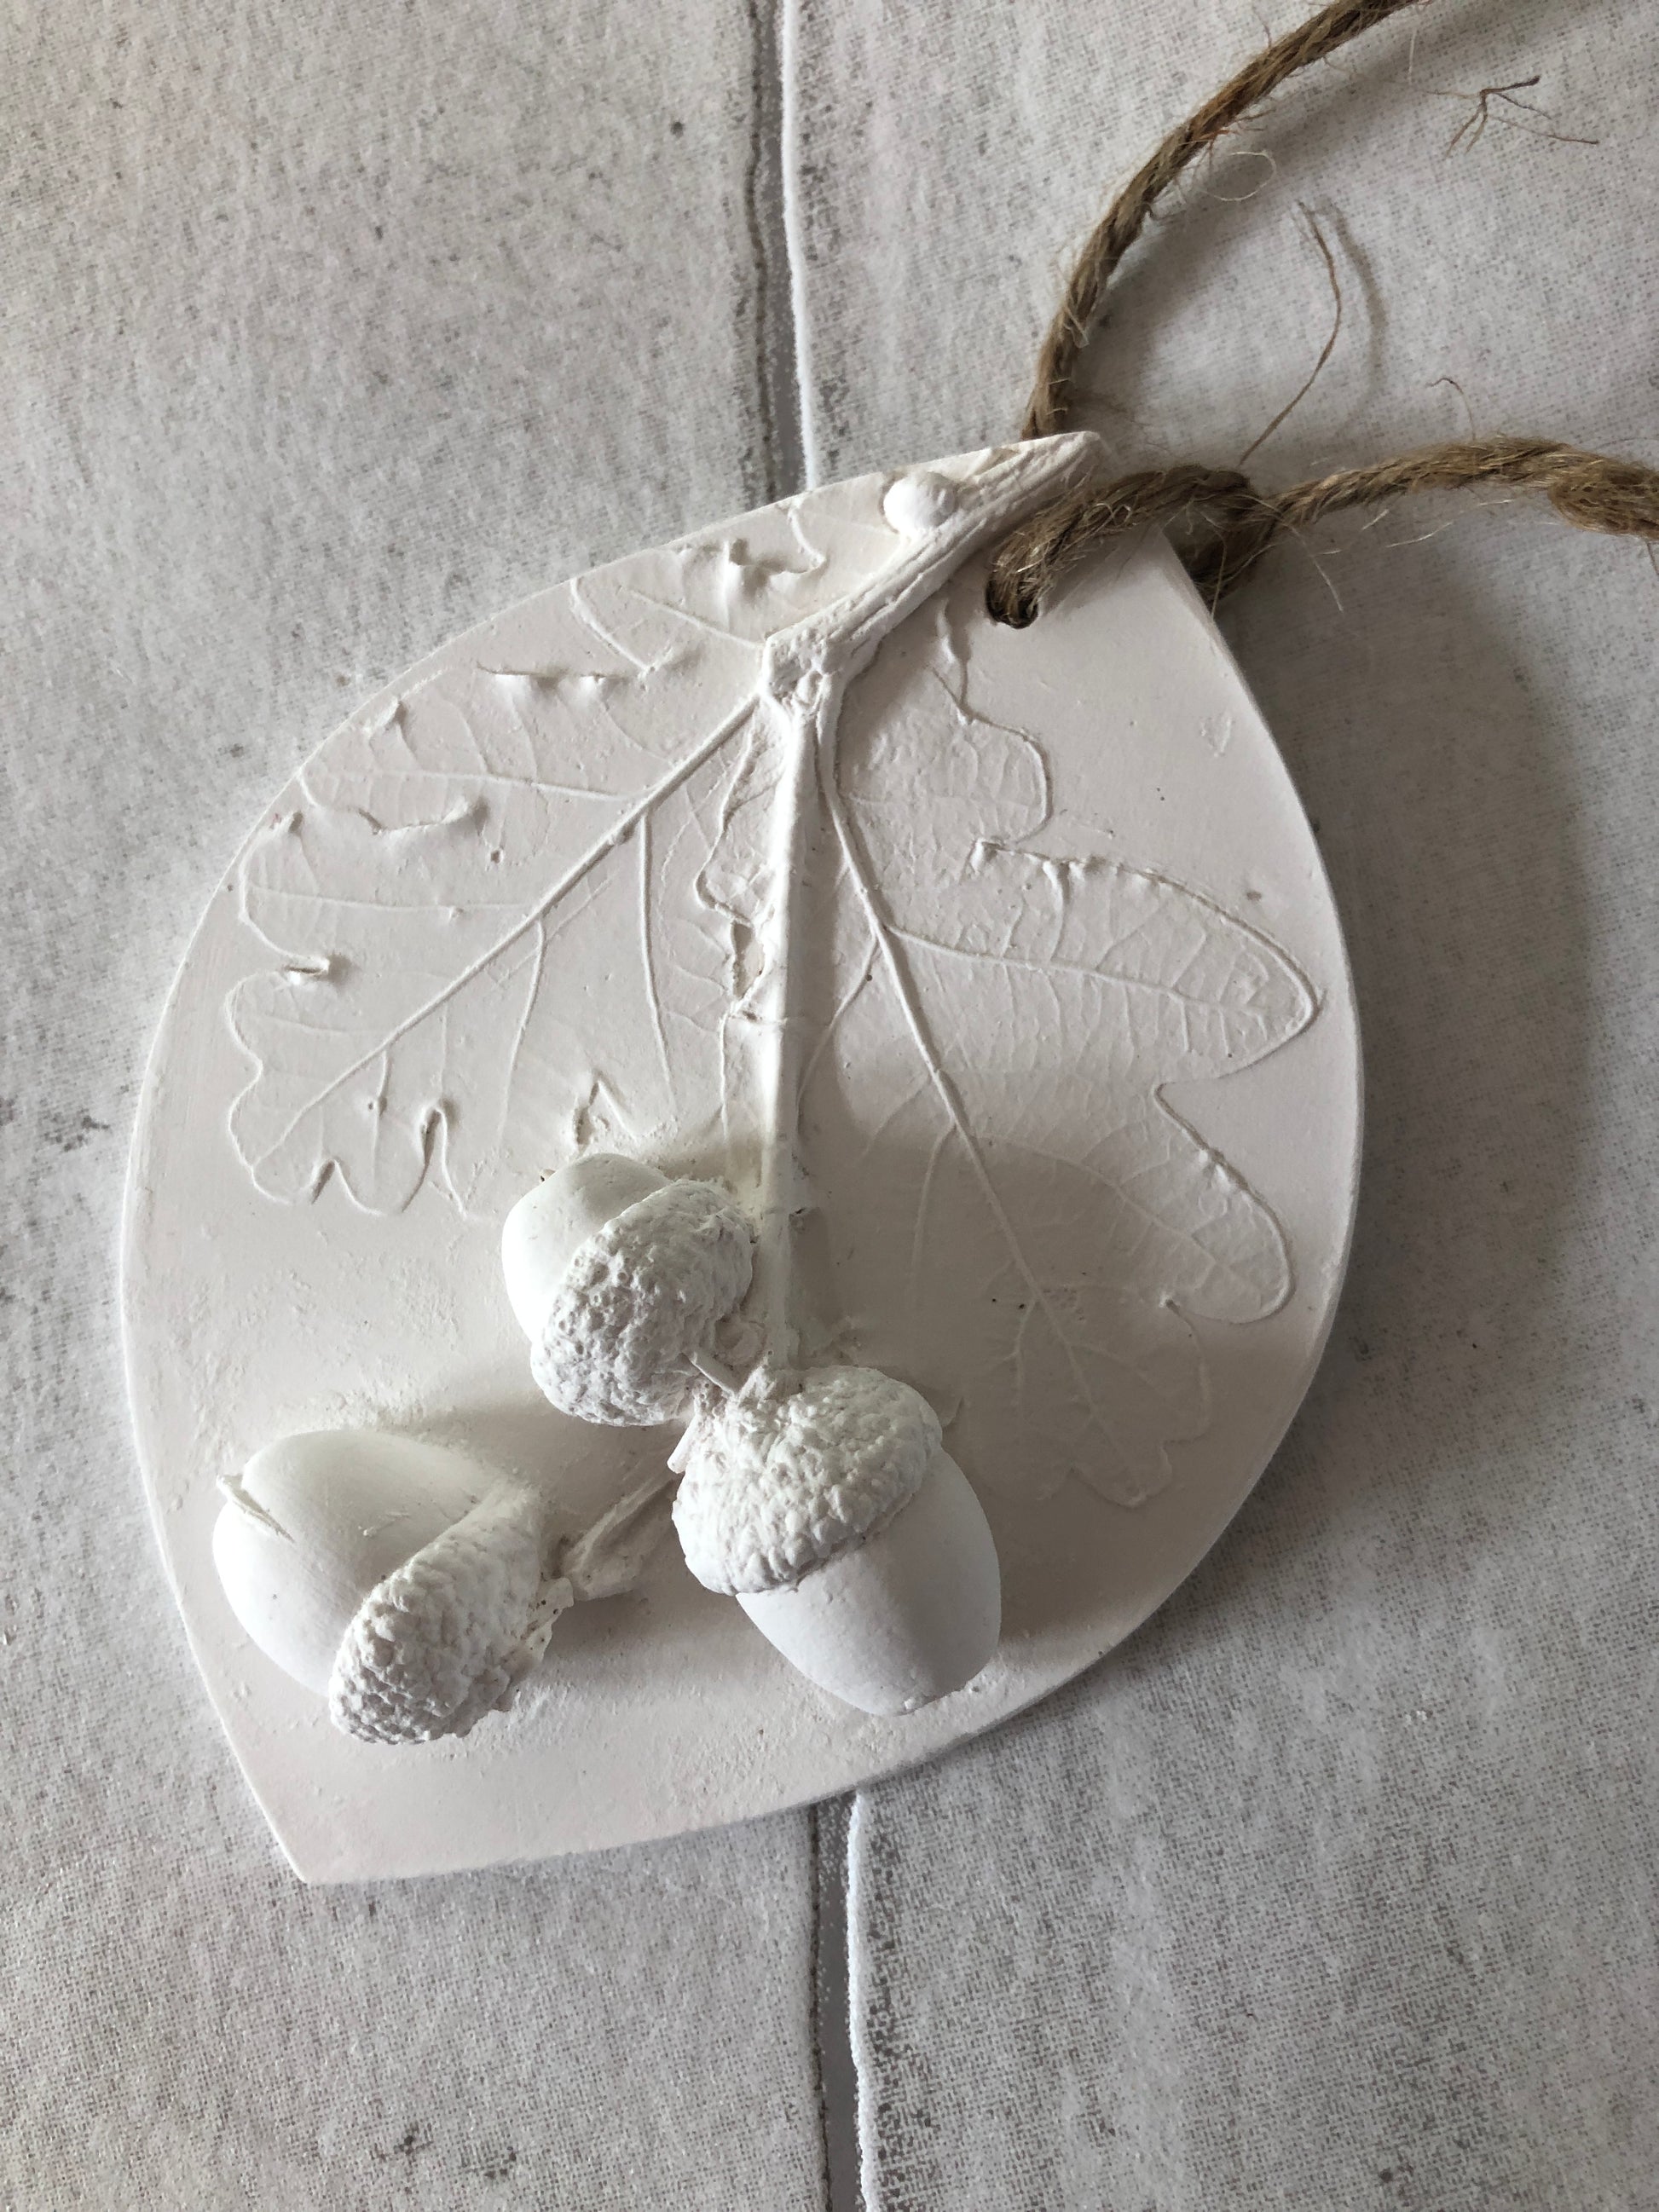 botanical cast fragrance diffuser featuring three acorns and two oak leaves